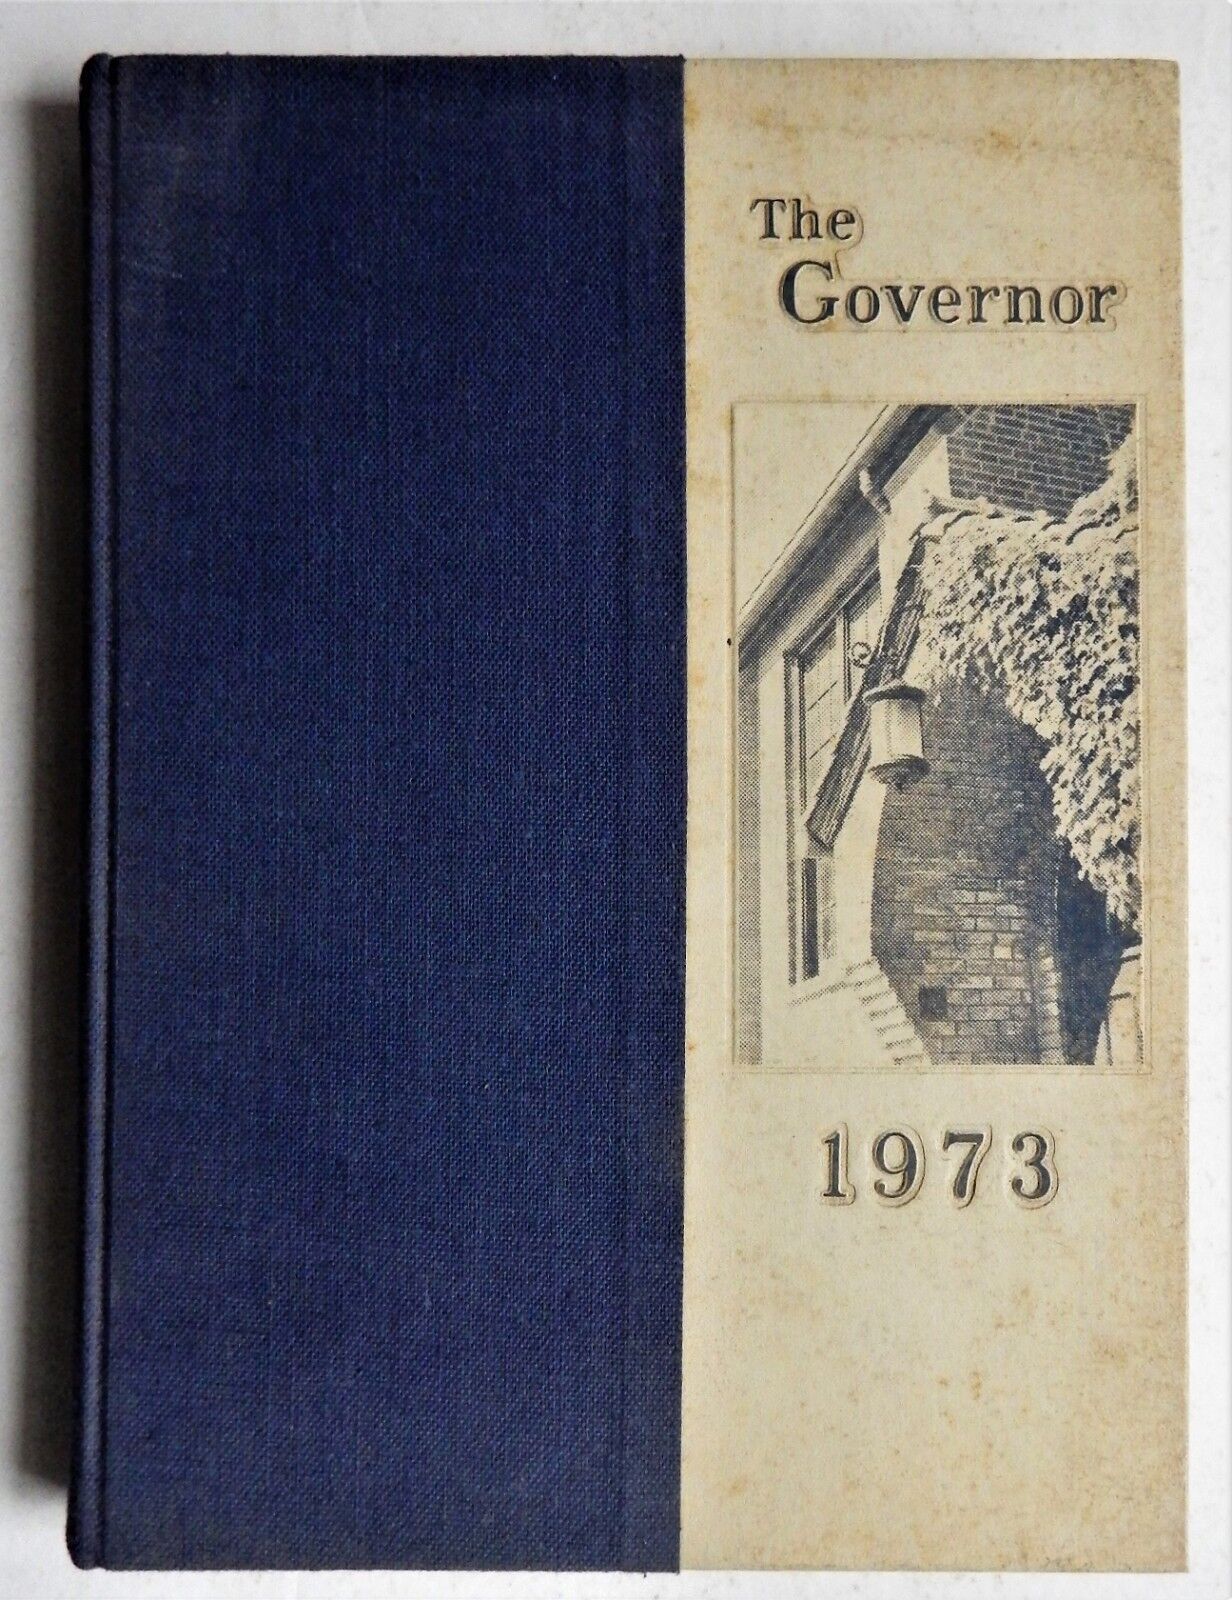 JOHN BURROUGHS HIGH SCHOOL YEARBOOK GOVERNOR LADUE MO ST LOUIS 1973